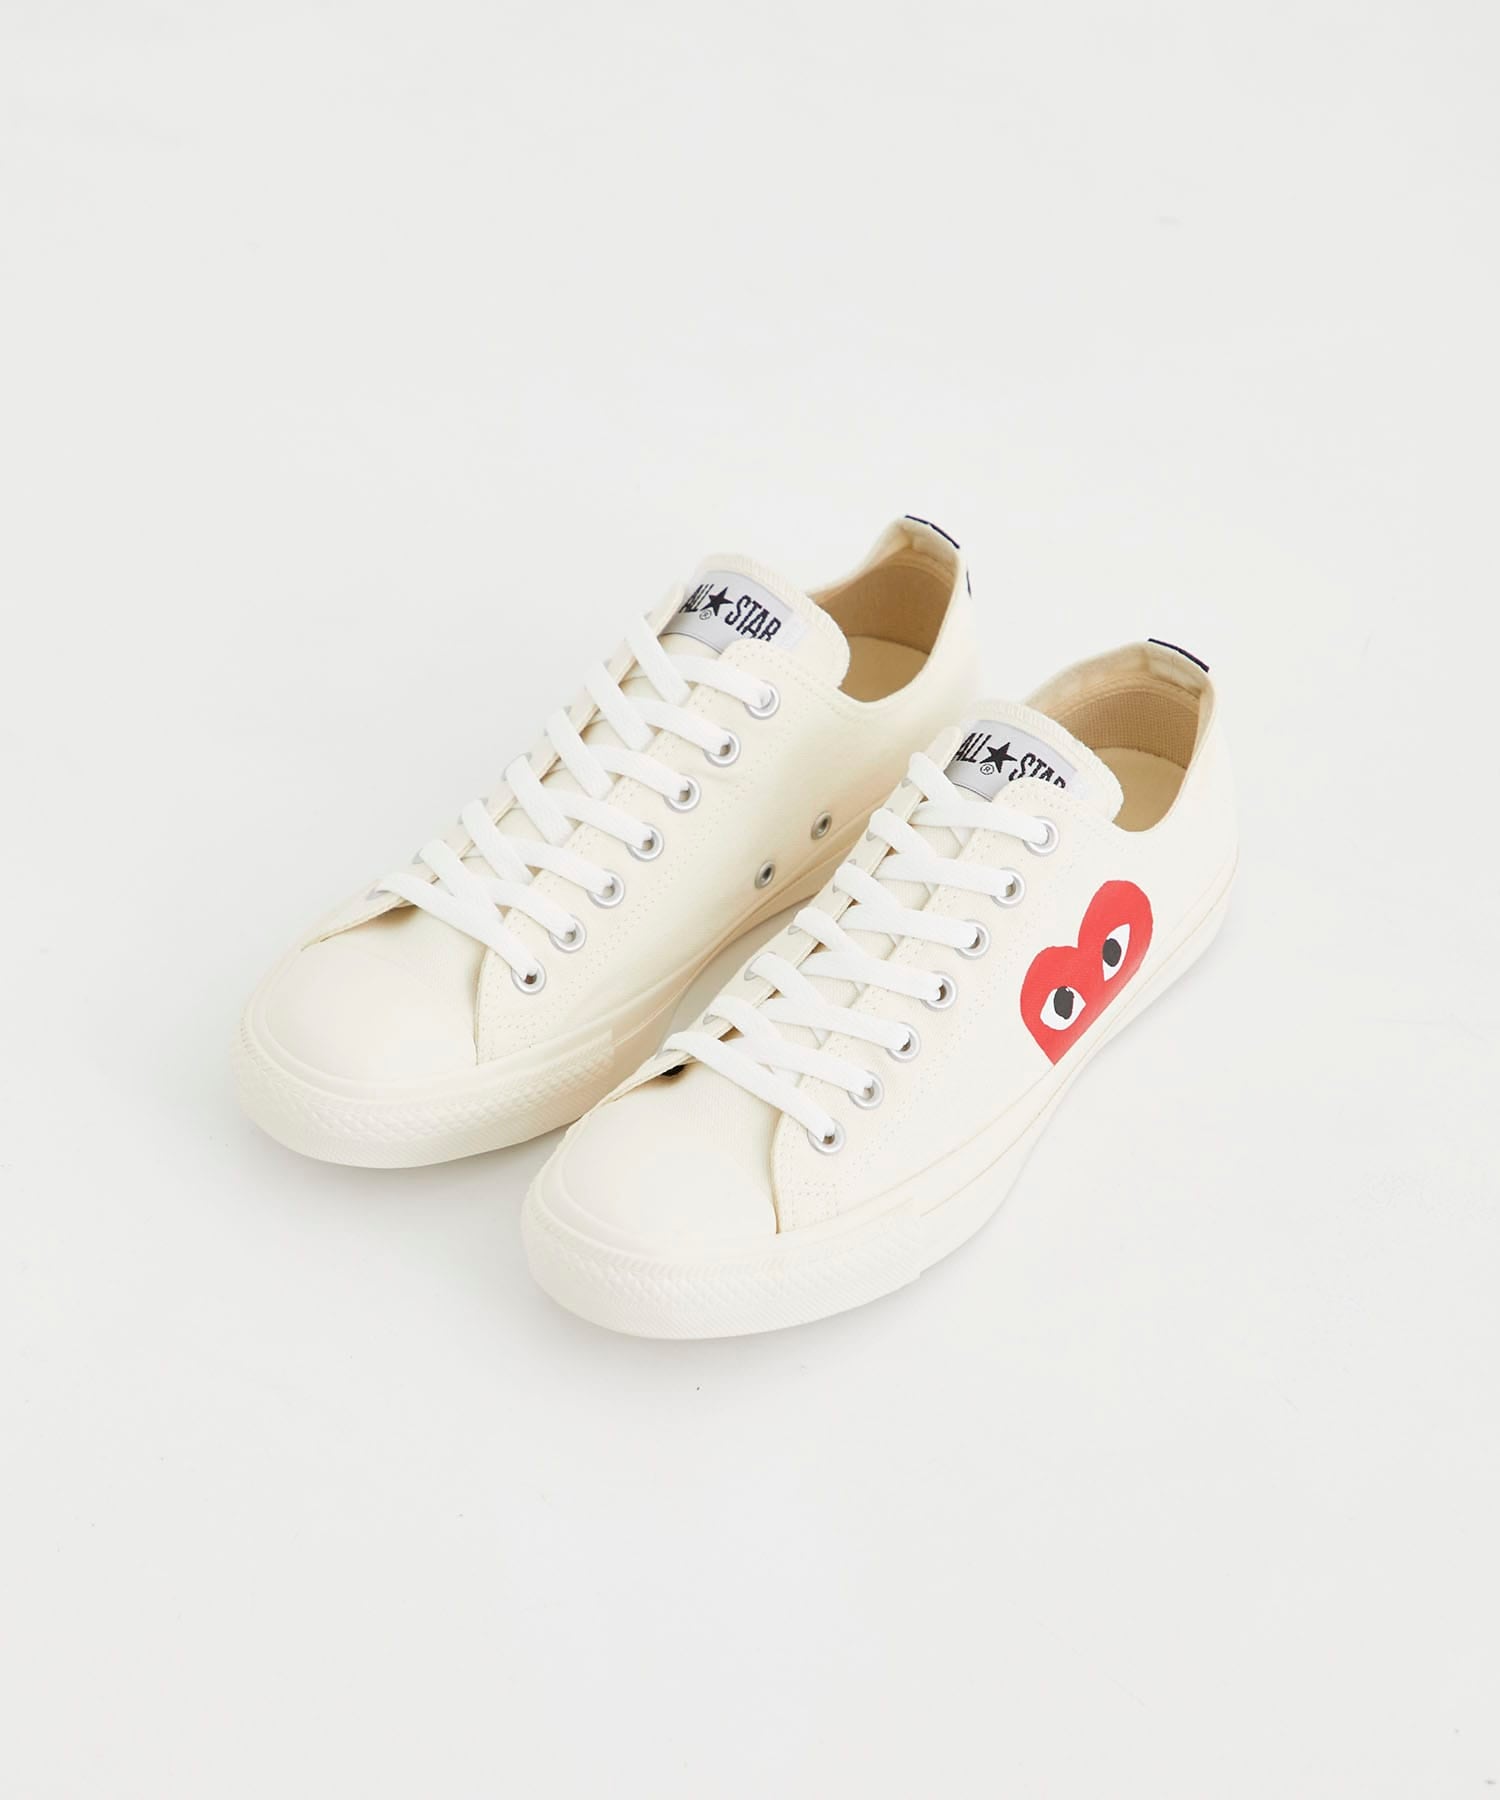 PLAY CONVERSE CHUCK TAYLOR Allstar Low PLAY Comme des Garcons